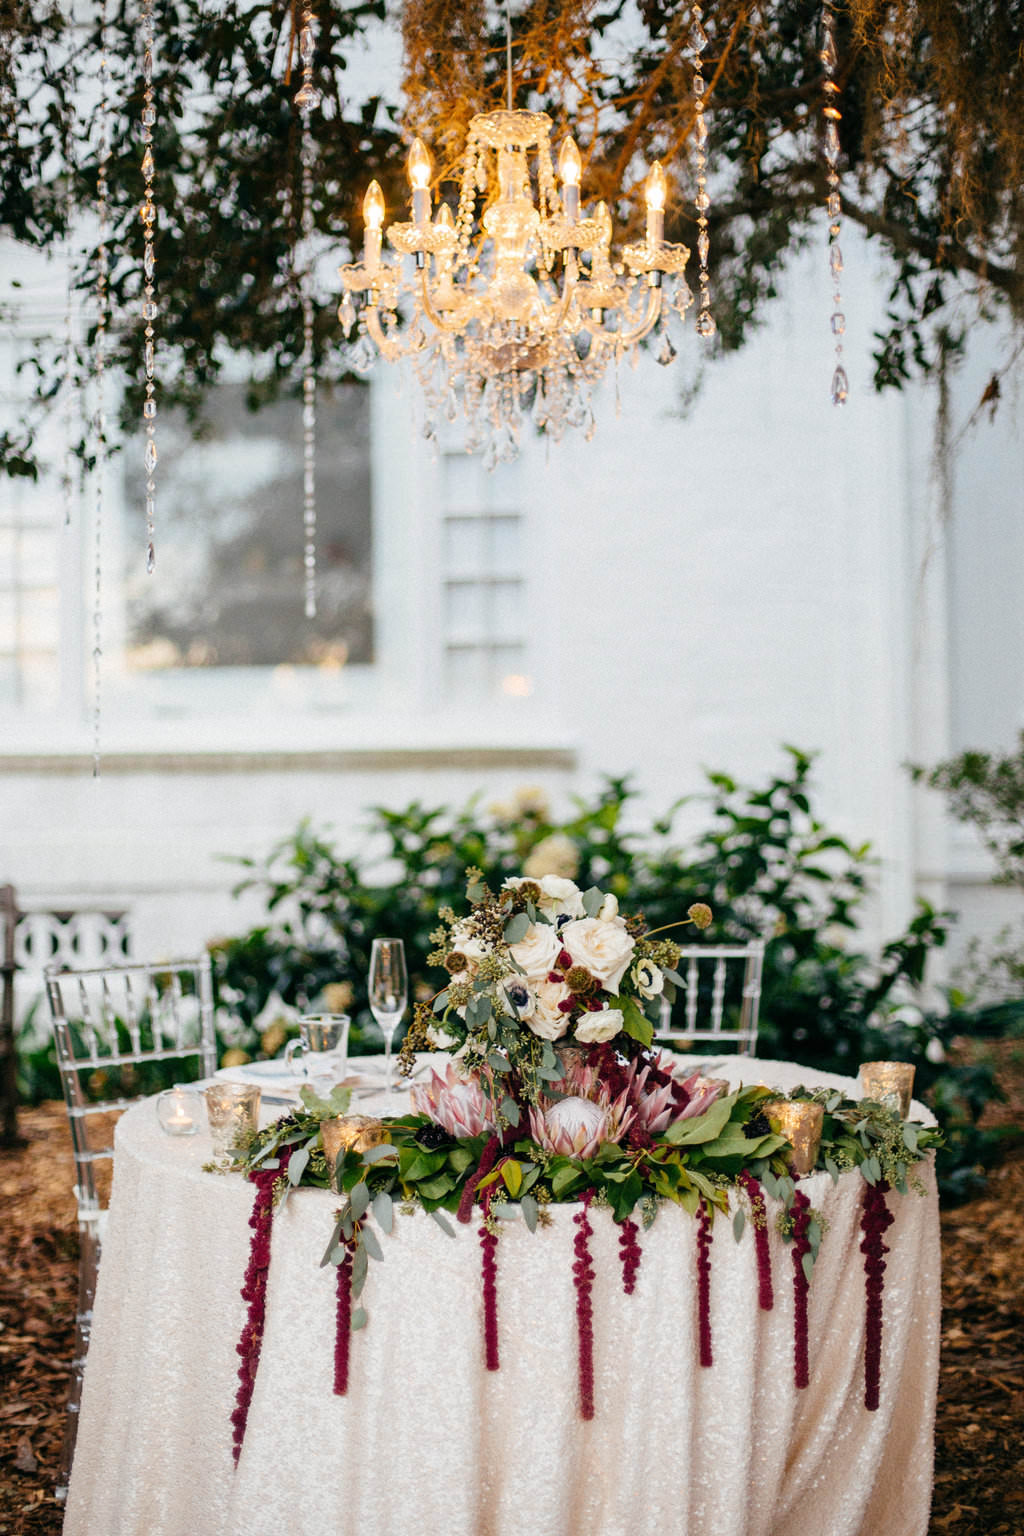 Outdoor Garden Wedding Reception Decor, Sweetheart Table with Ivory Tablecloth, Greenery Garland and Red Hanging Amaranthus, Ivory Roses, White Anemones, King Protea and Greenery Flower Centerpiece, Hanging Crystal Chandelier | Tampa Bay Wedding Planner NK Productions